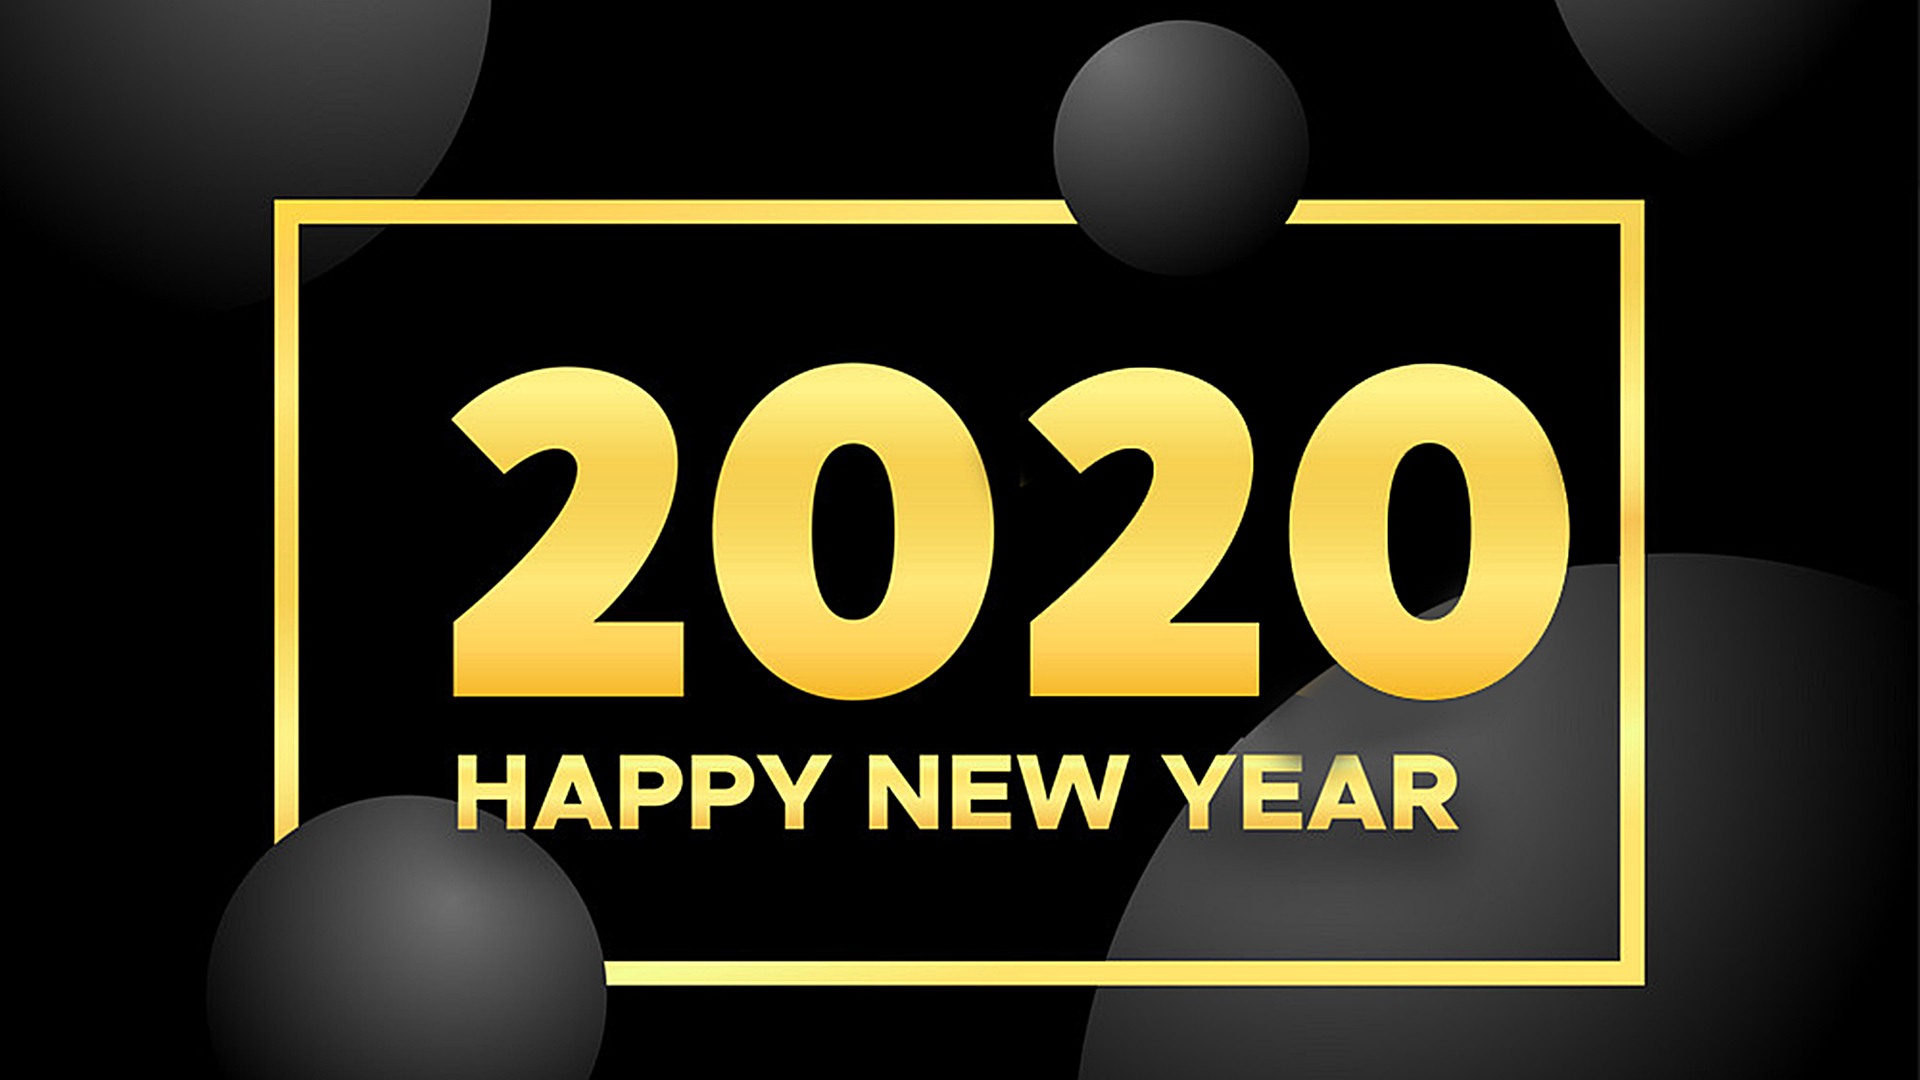 Happy New Year 2020 Background HD Wallpapers 45540   Baltana 1920x1080